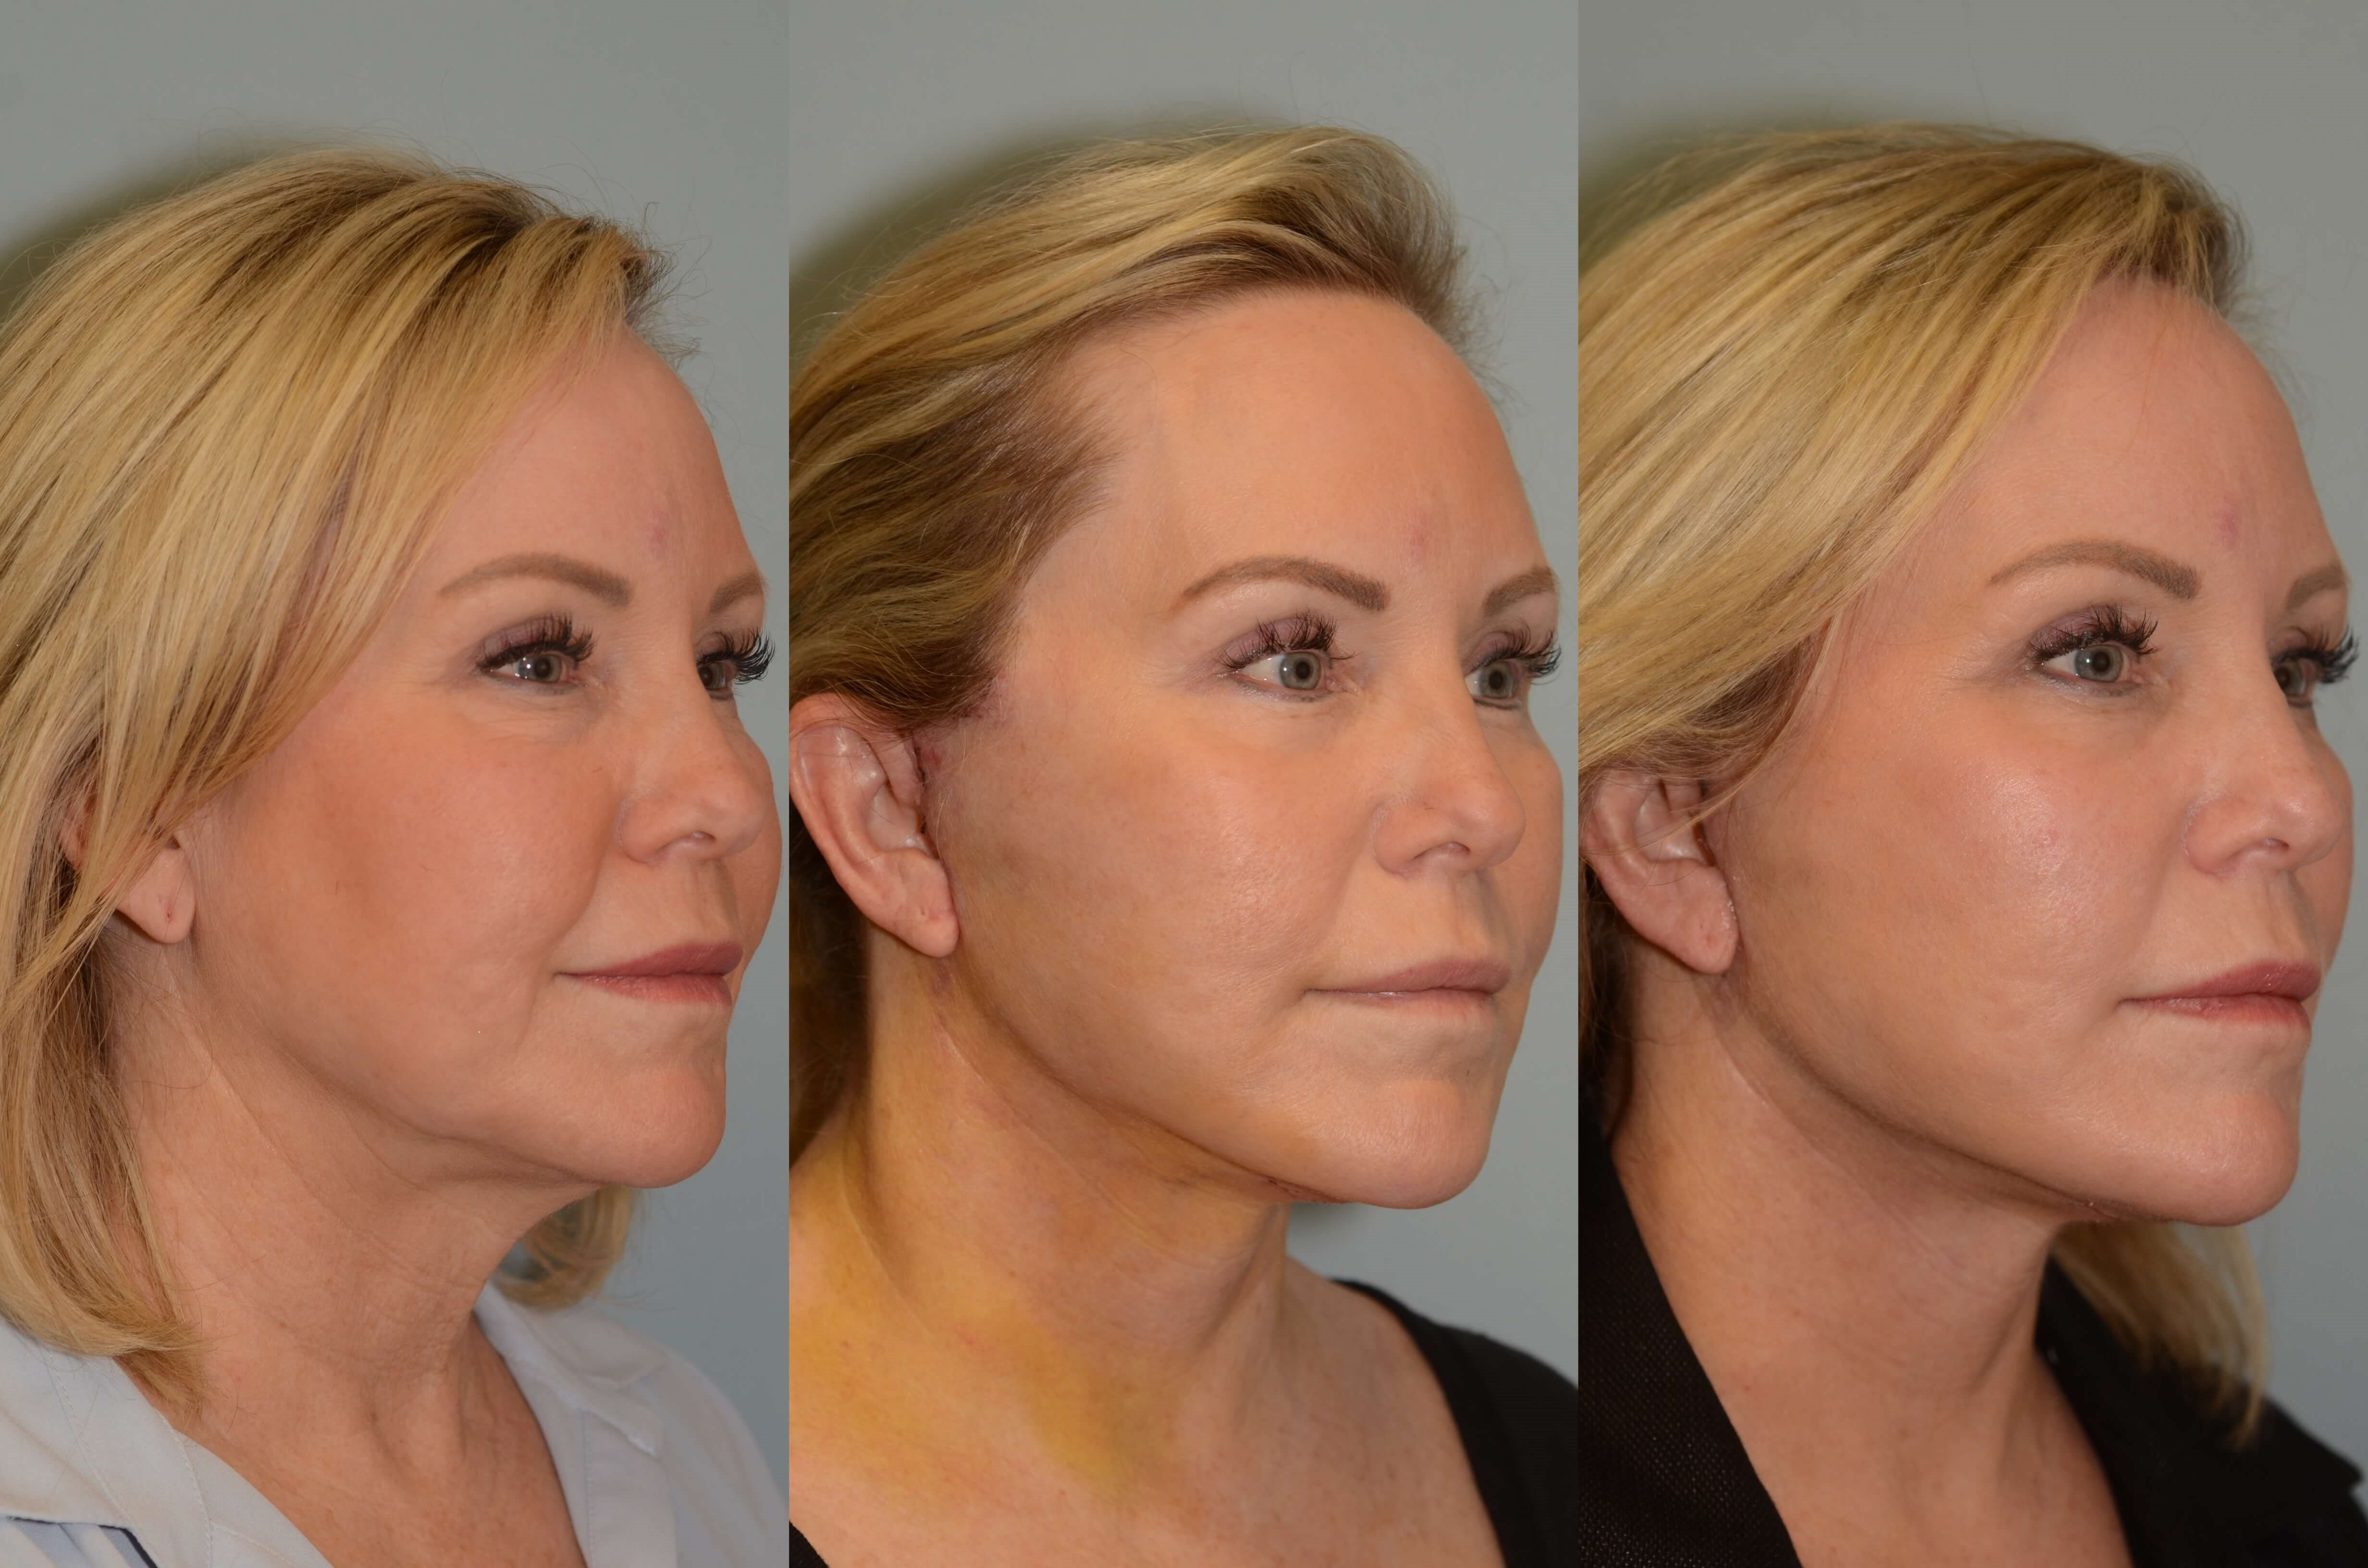 Before and After Facelift & Neck Lift Photos